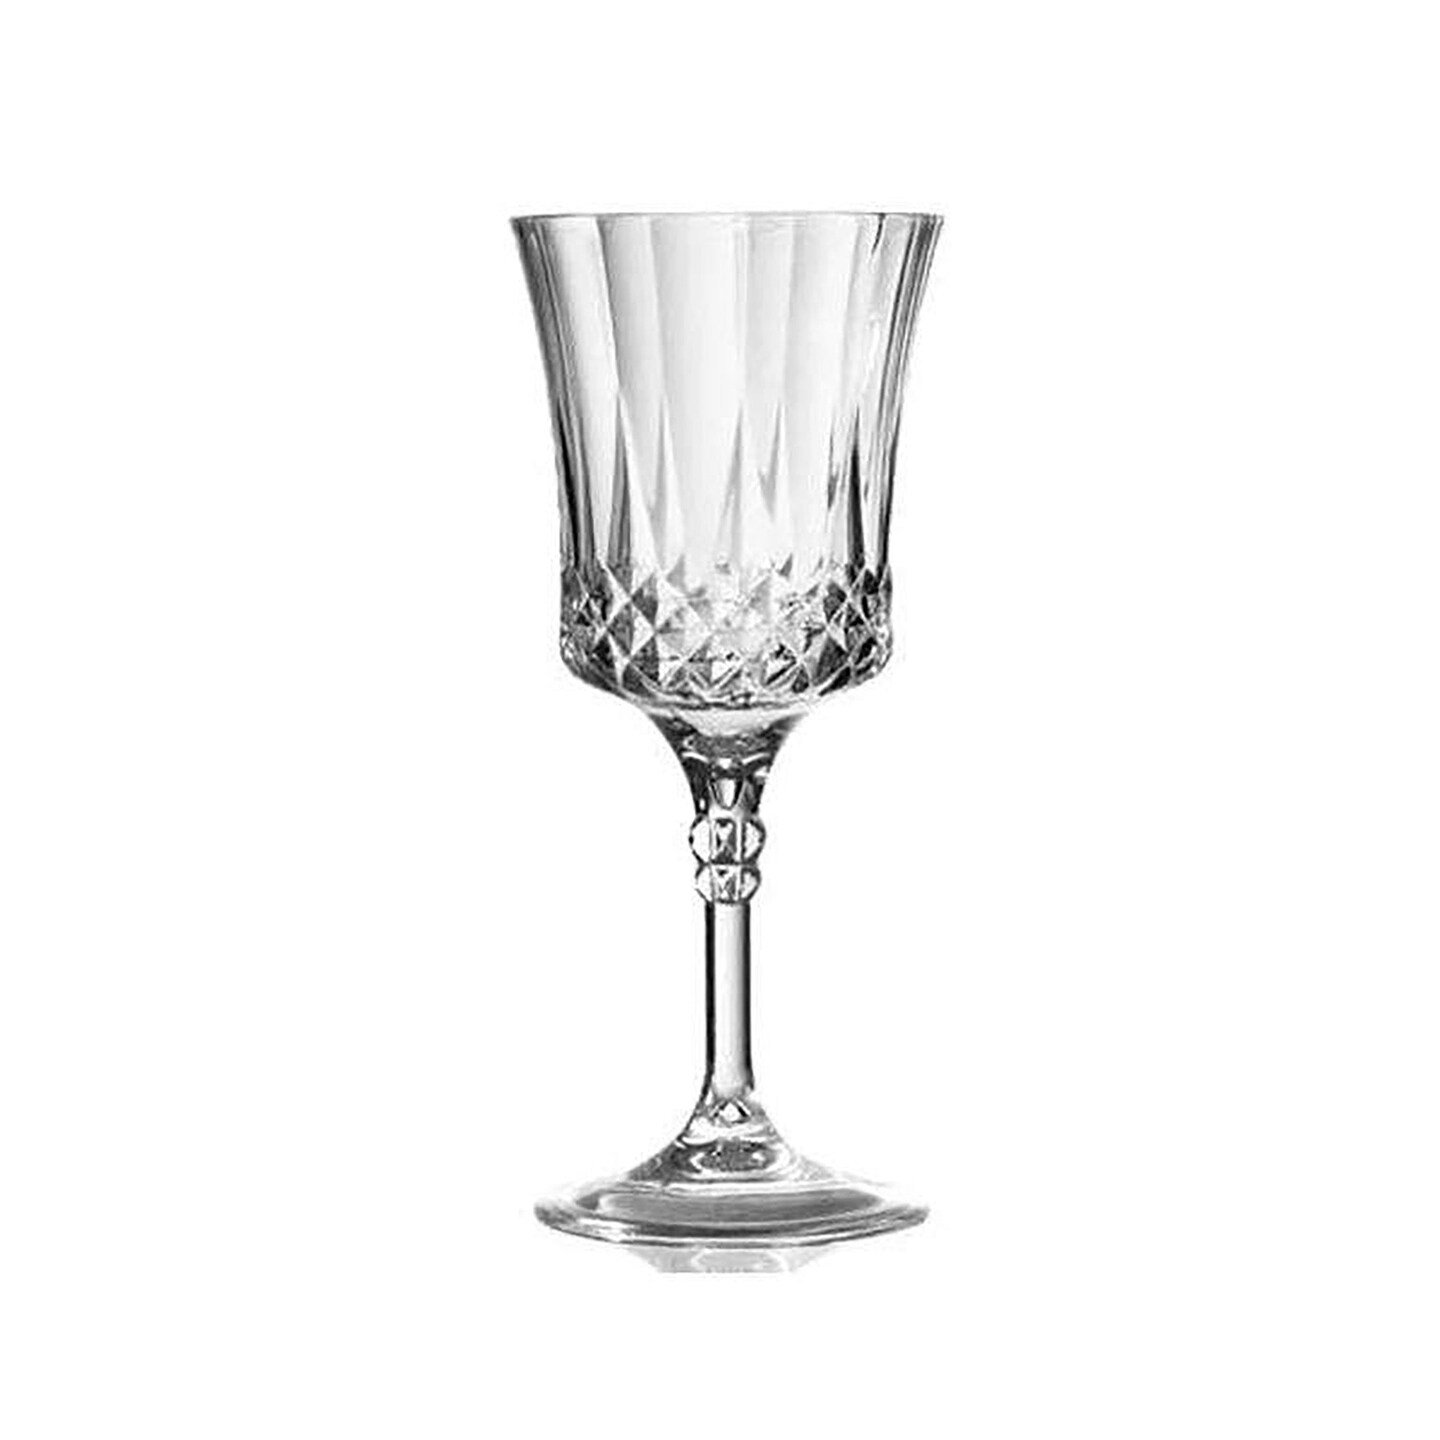 Crystal Cut Plastic Wine Goblets - 11 Ounce (48 Goblets)